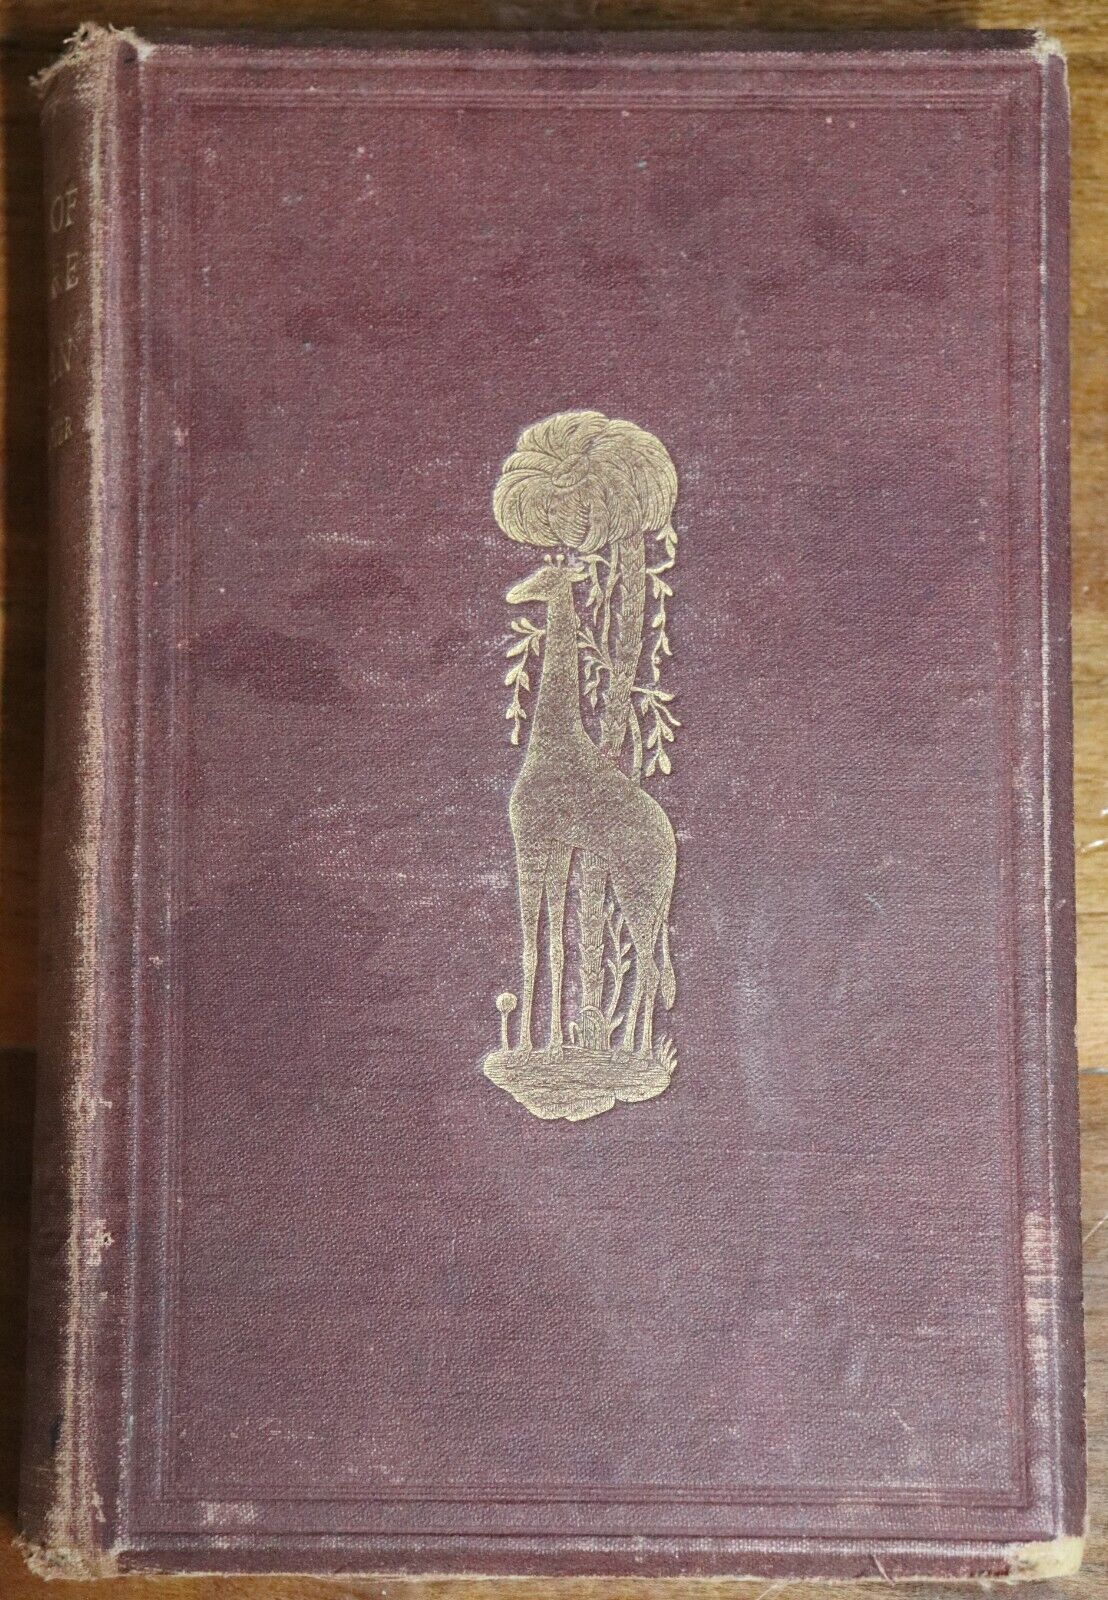 The Book Of Nature & Of Man by C Napier - 1870 - Antique Science & Nature Book